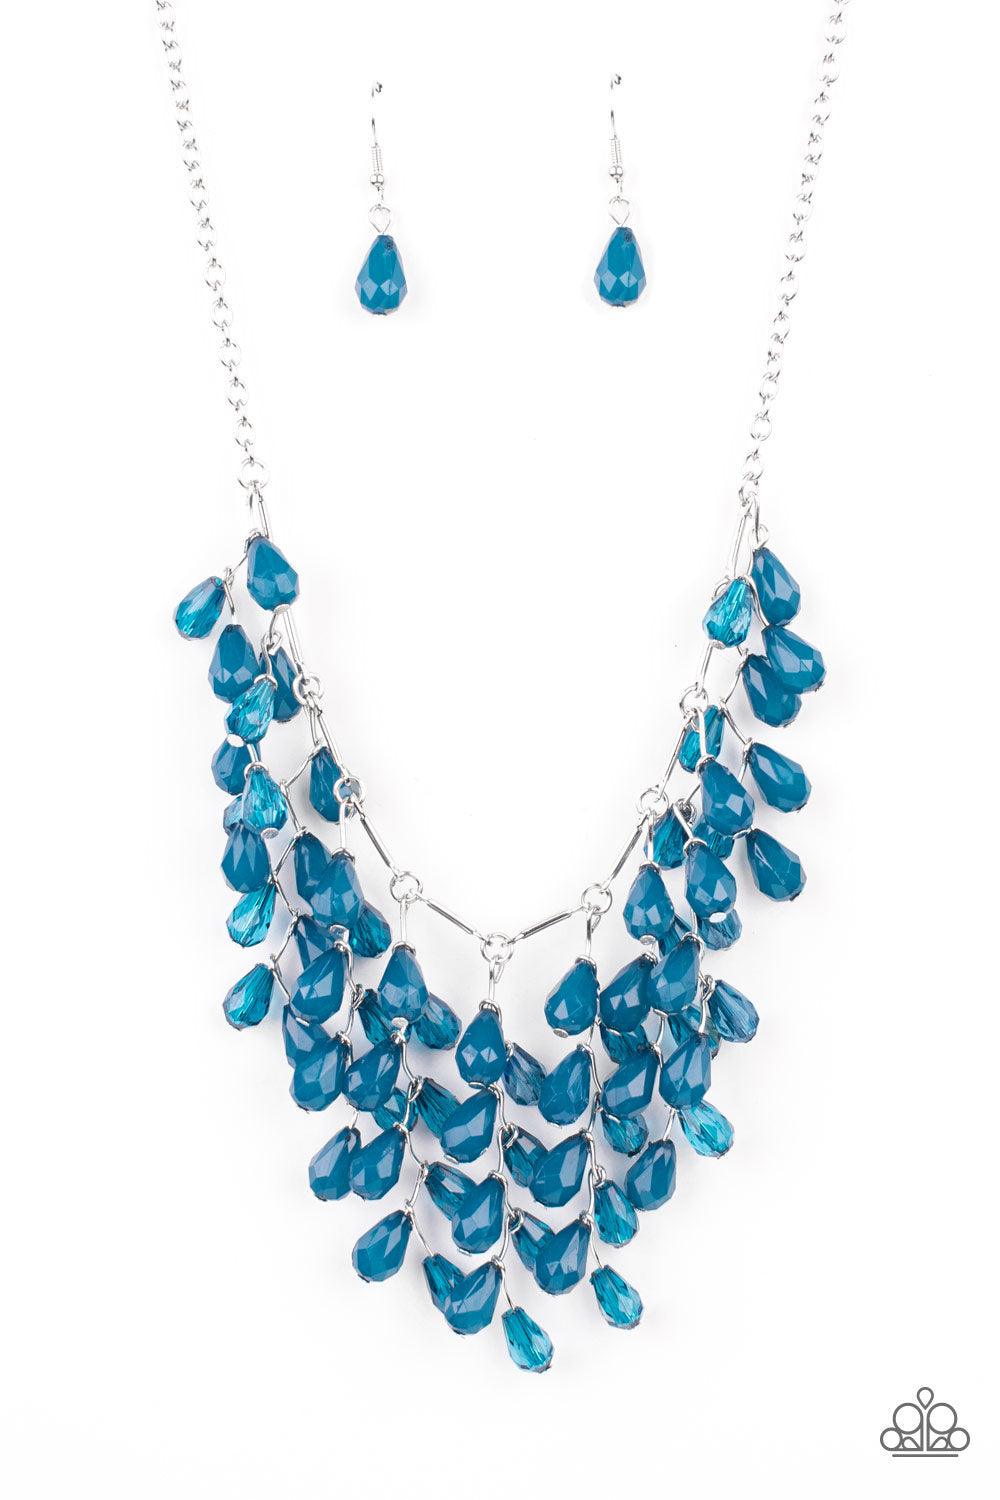 Paparazzi Accessories Garden Fairytale - Blue A shimmery collection of opaque and clear crystal-like Mykonos Blue teardrop beads delicately cluster along a linked strand of silver bars, creating an ethereally leafy fringe below the collar. Features an adj